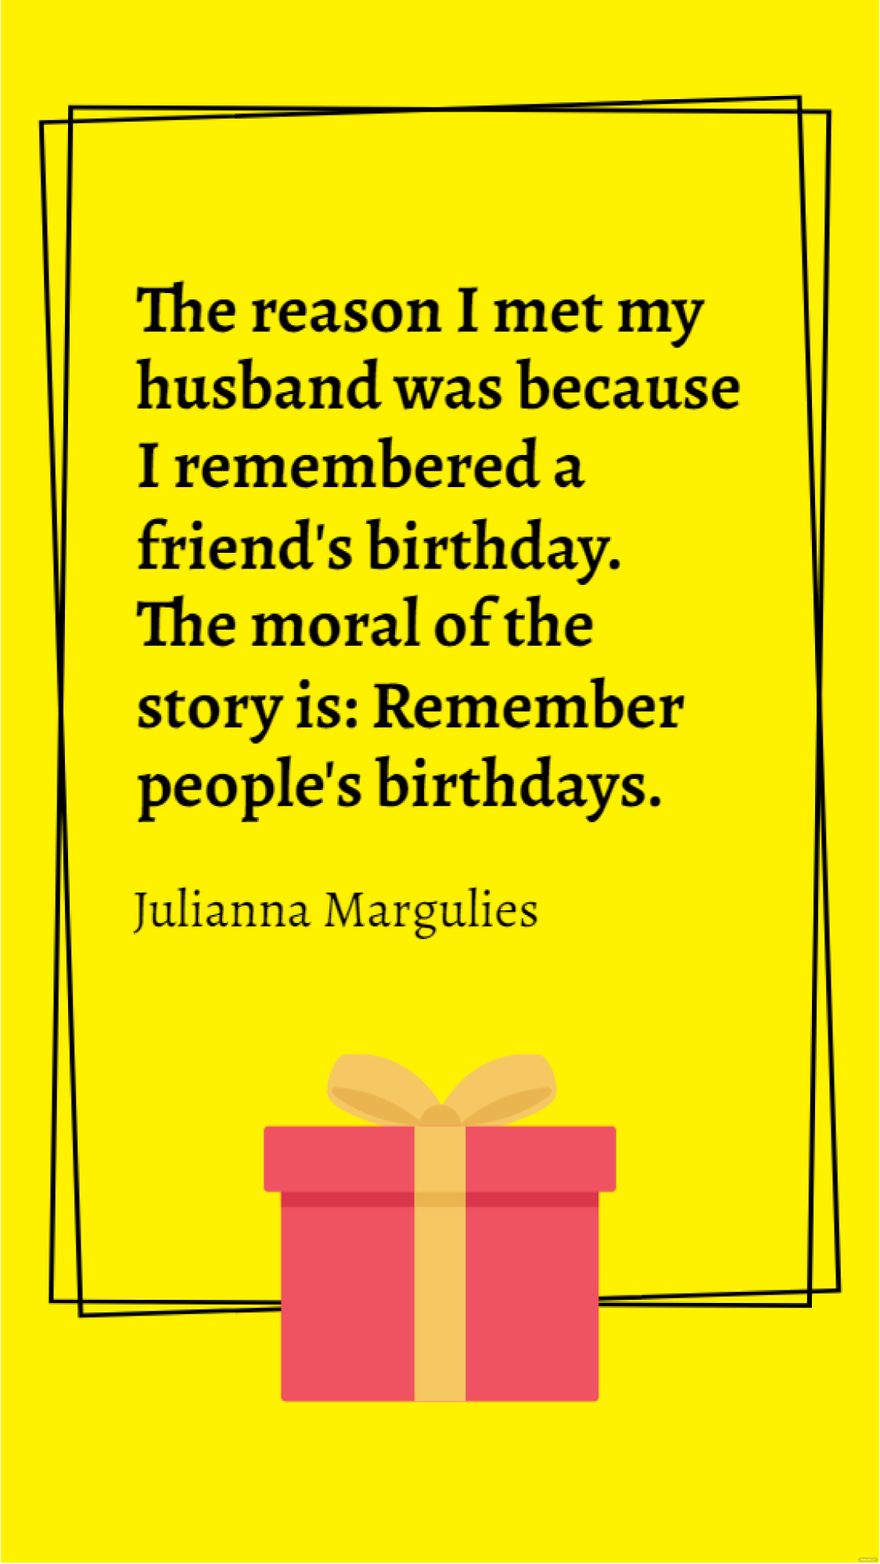 Free Julianna Margulies - The reason I met my husband was because I remembered a friend's birthday. The moral of the story is: Remember people's birthdays. in JPG